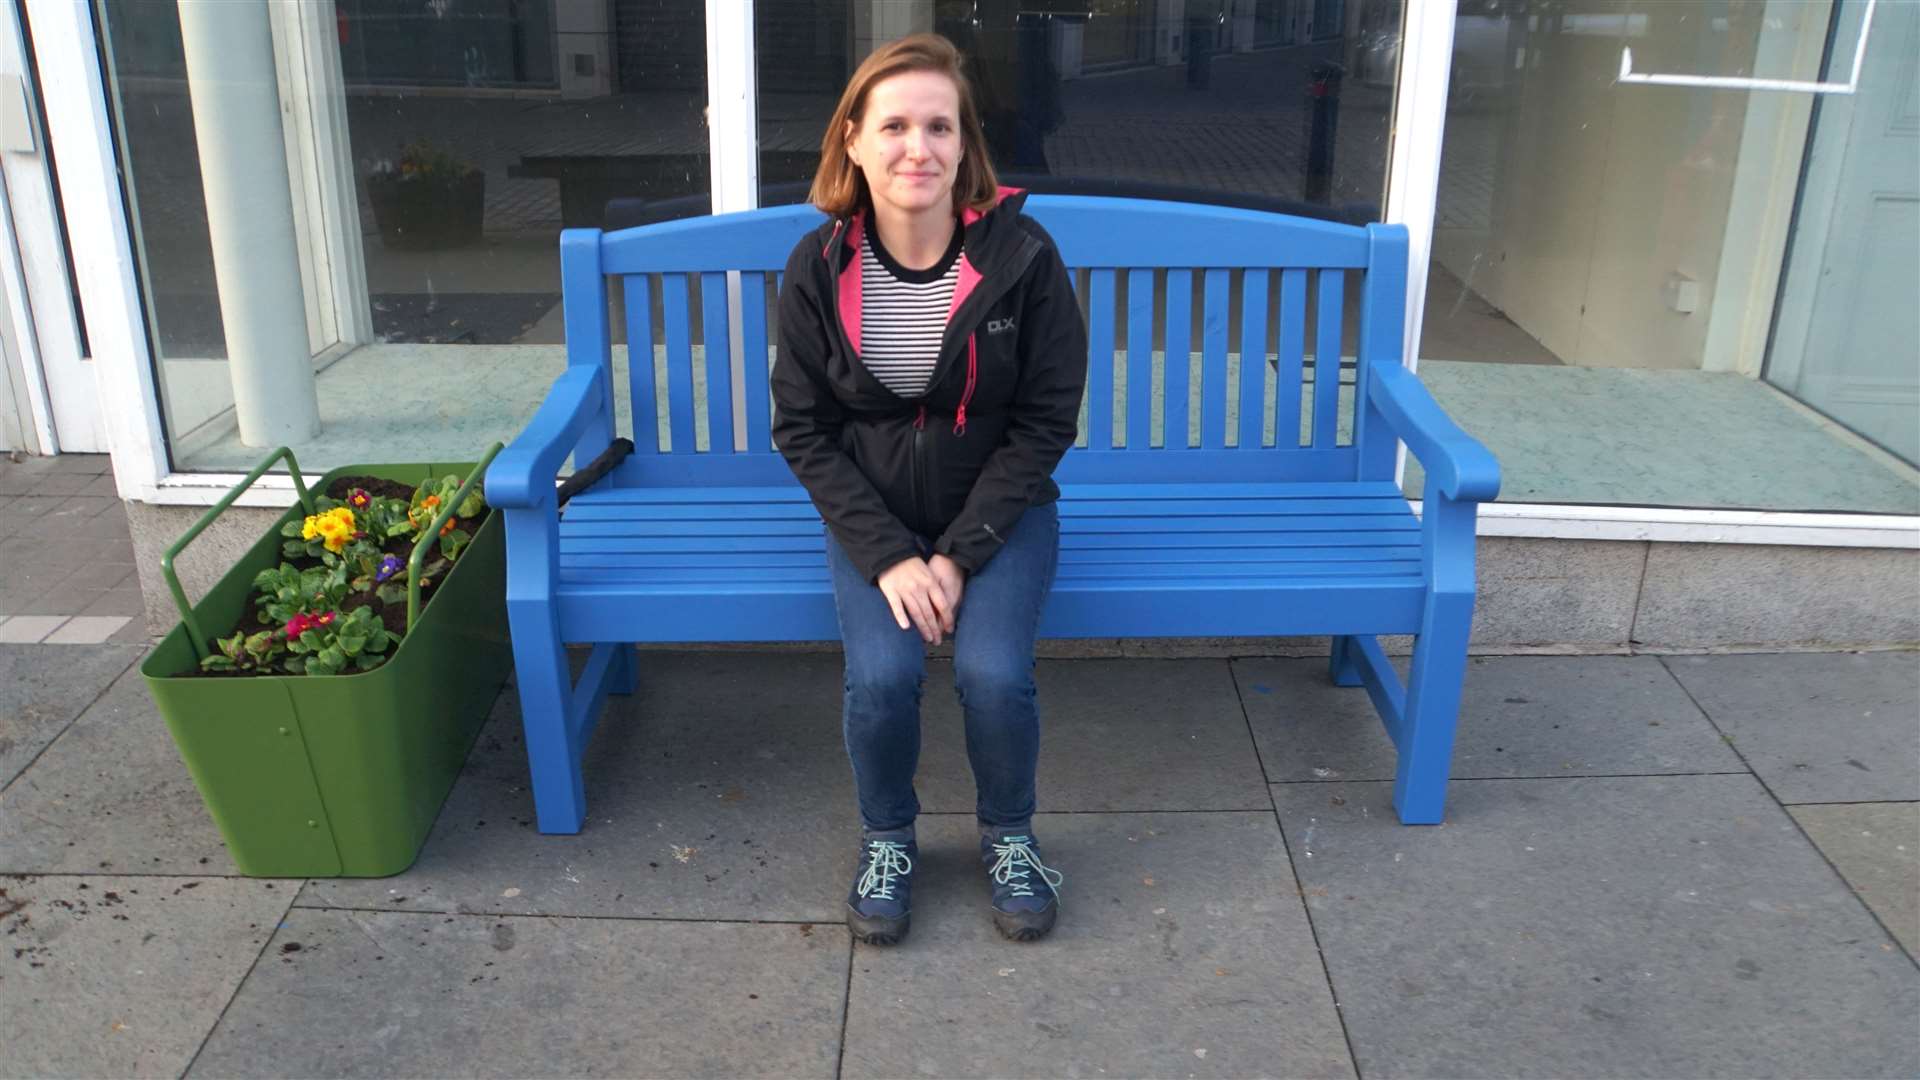 Kasia Koziel, who headed up the Sustrans team visiting Wick last week, sits on a bright blue bench that was painted up to bring a touch of colour to the town centre.